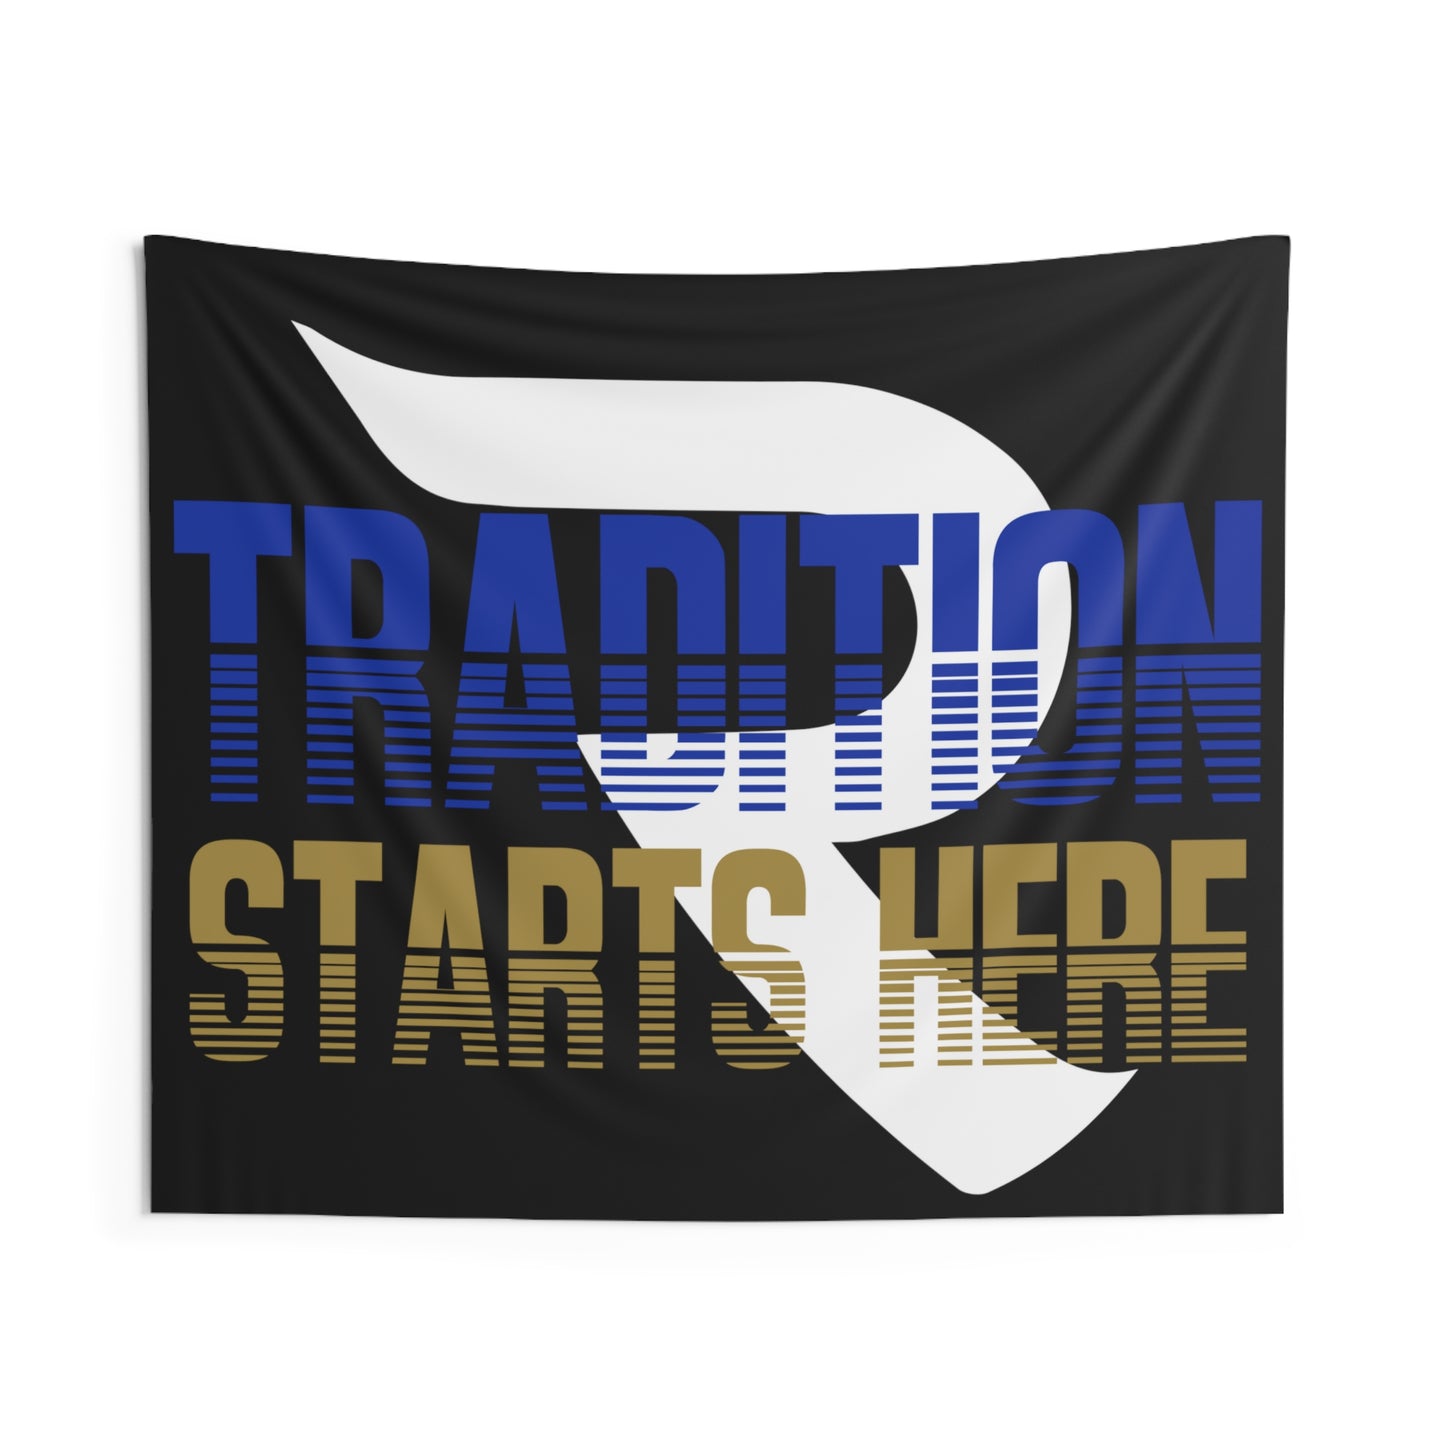 Tradition Starts Here Reed High School Raider Football Wall Tapestry (3 sizes available)